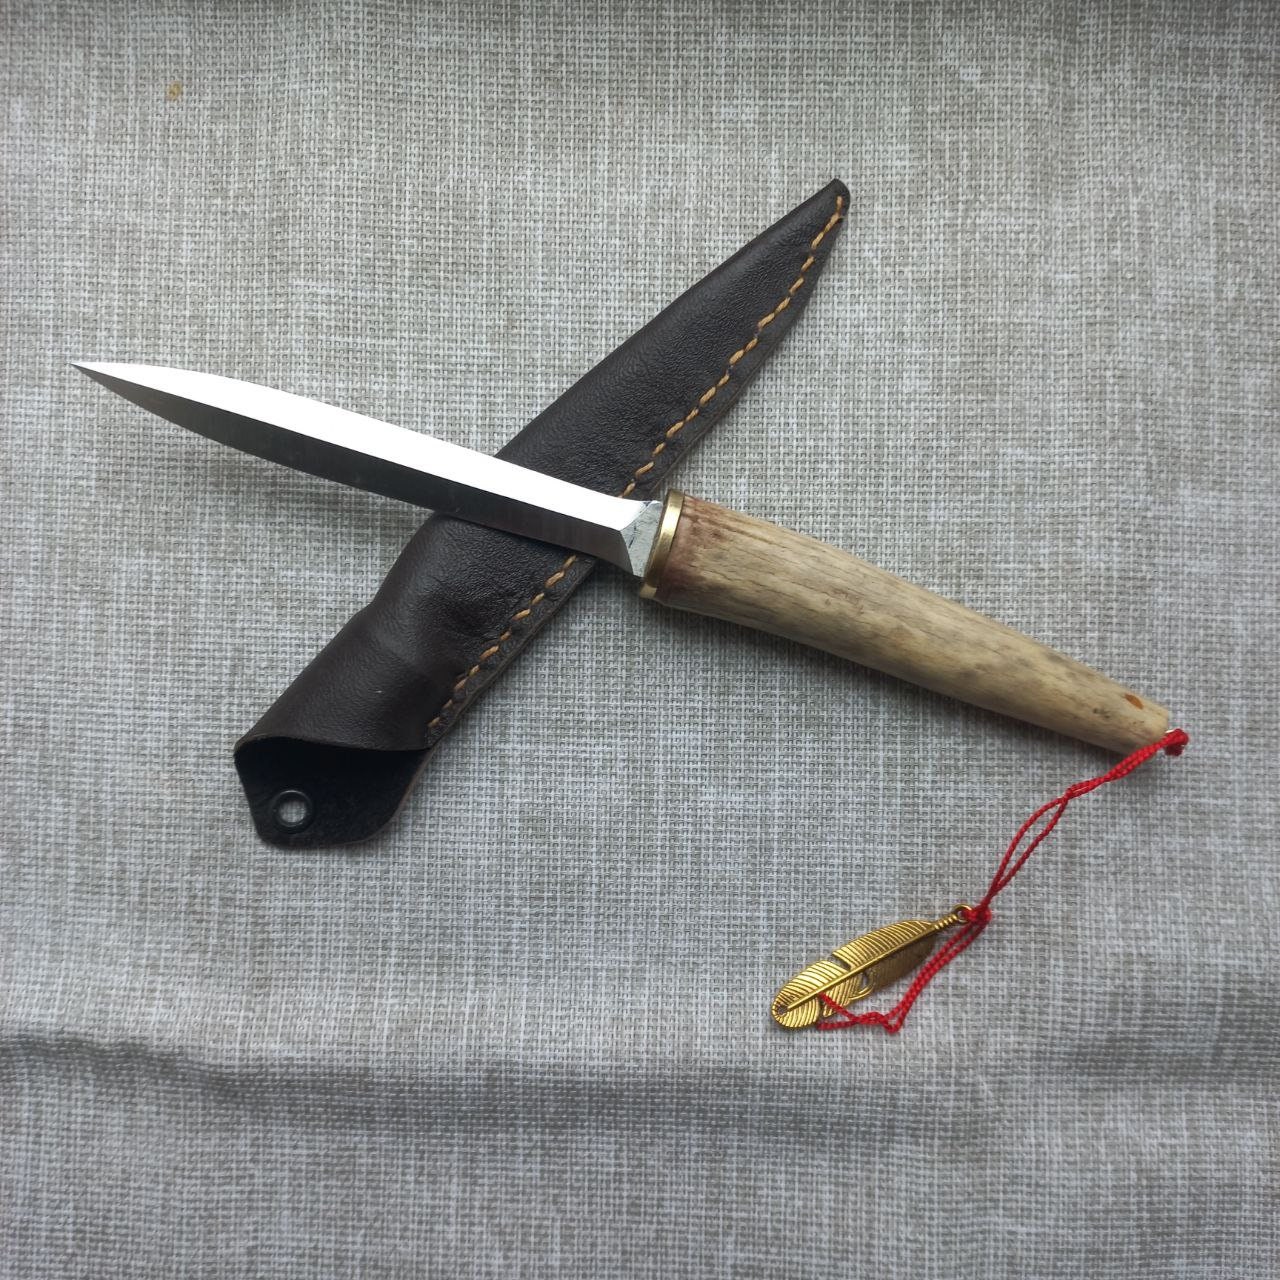 SOLD Continental Gothic-Style Cast-Bronze and Steel Daggar or Knife, C